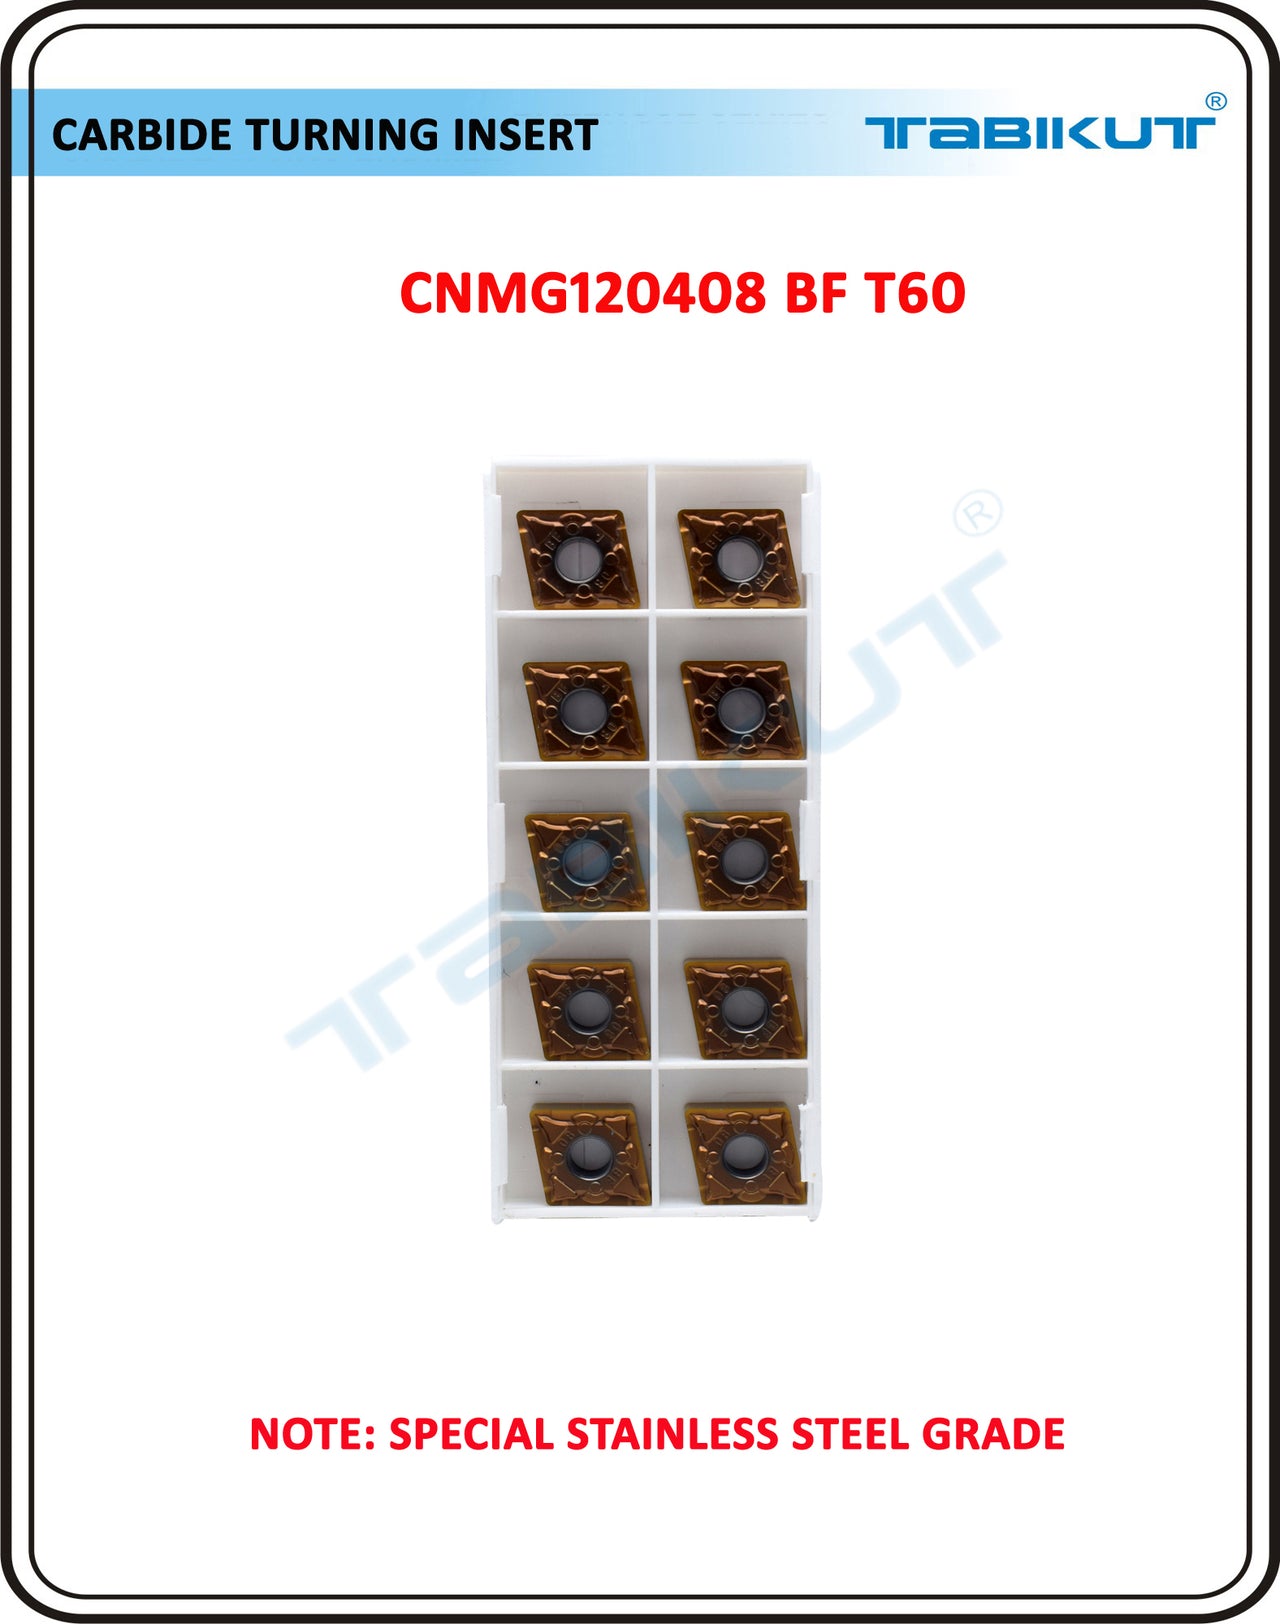 CNMG120404/08/12 BF T60 Stainless Steel